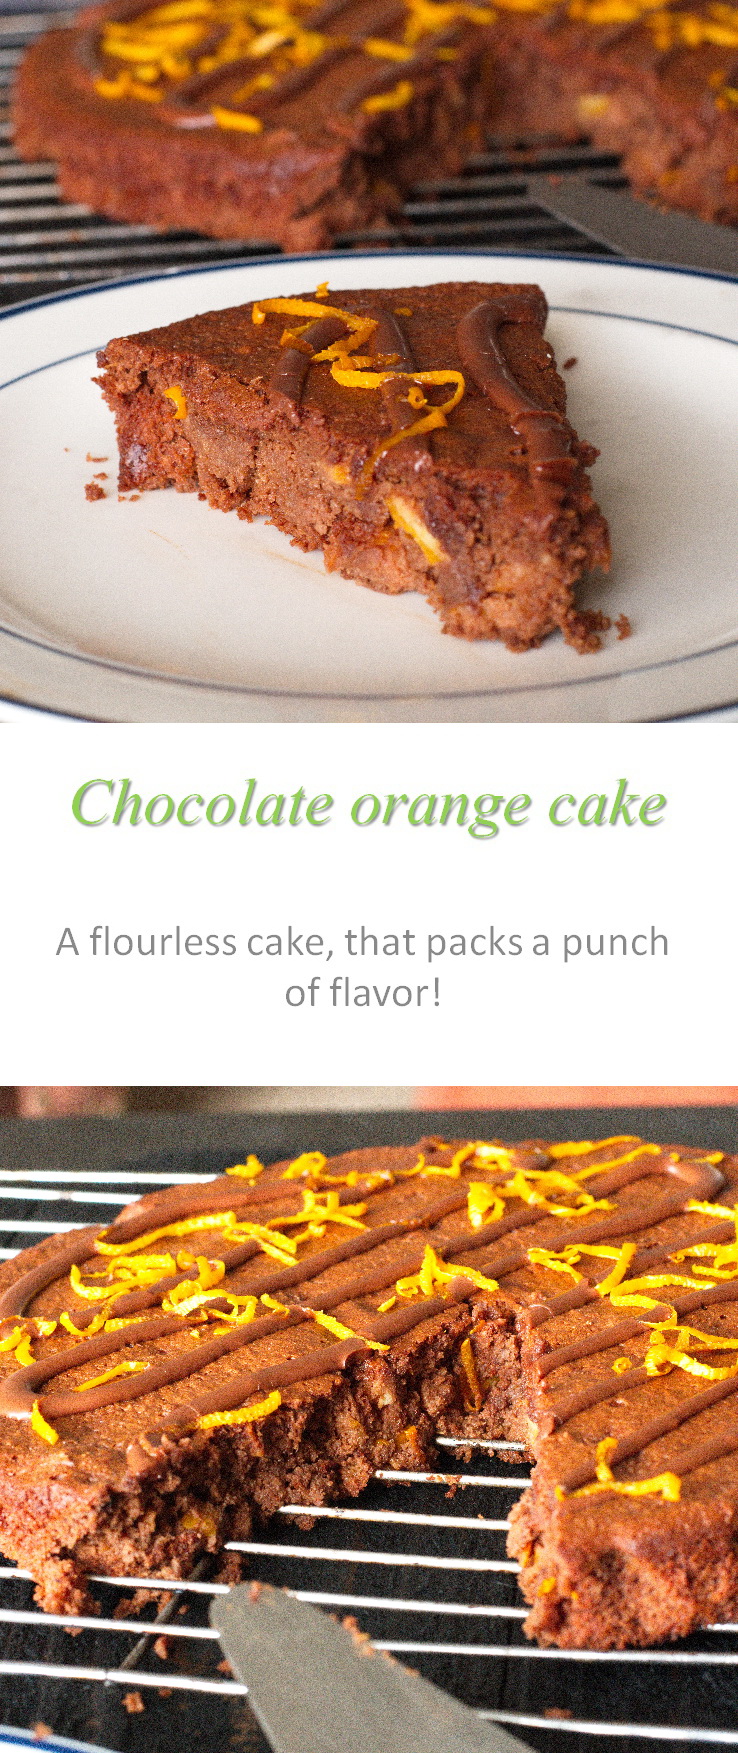 This chocolate orange cake is fully gluten and dairy-free, with simple ingredients and a great tang from the oranges! #orange